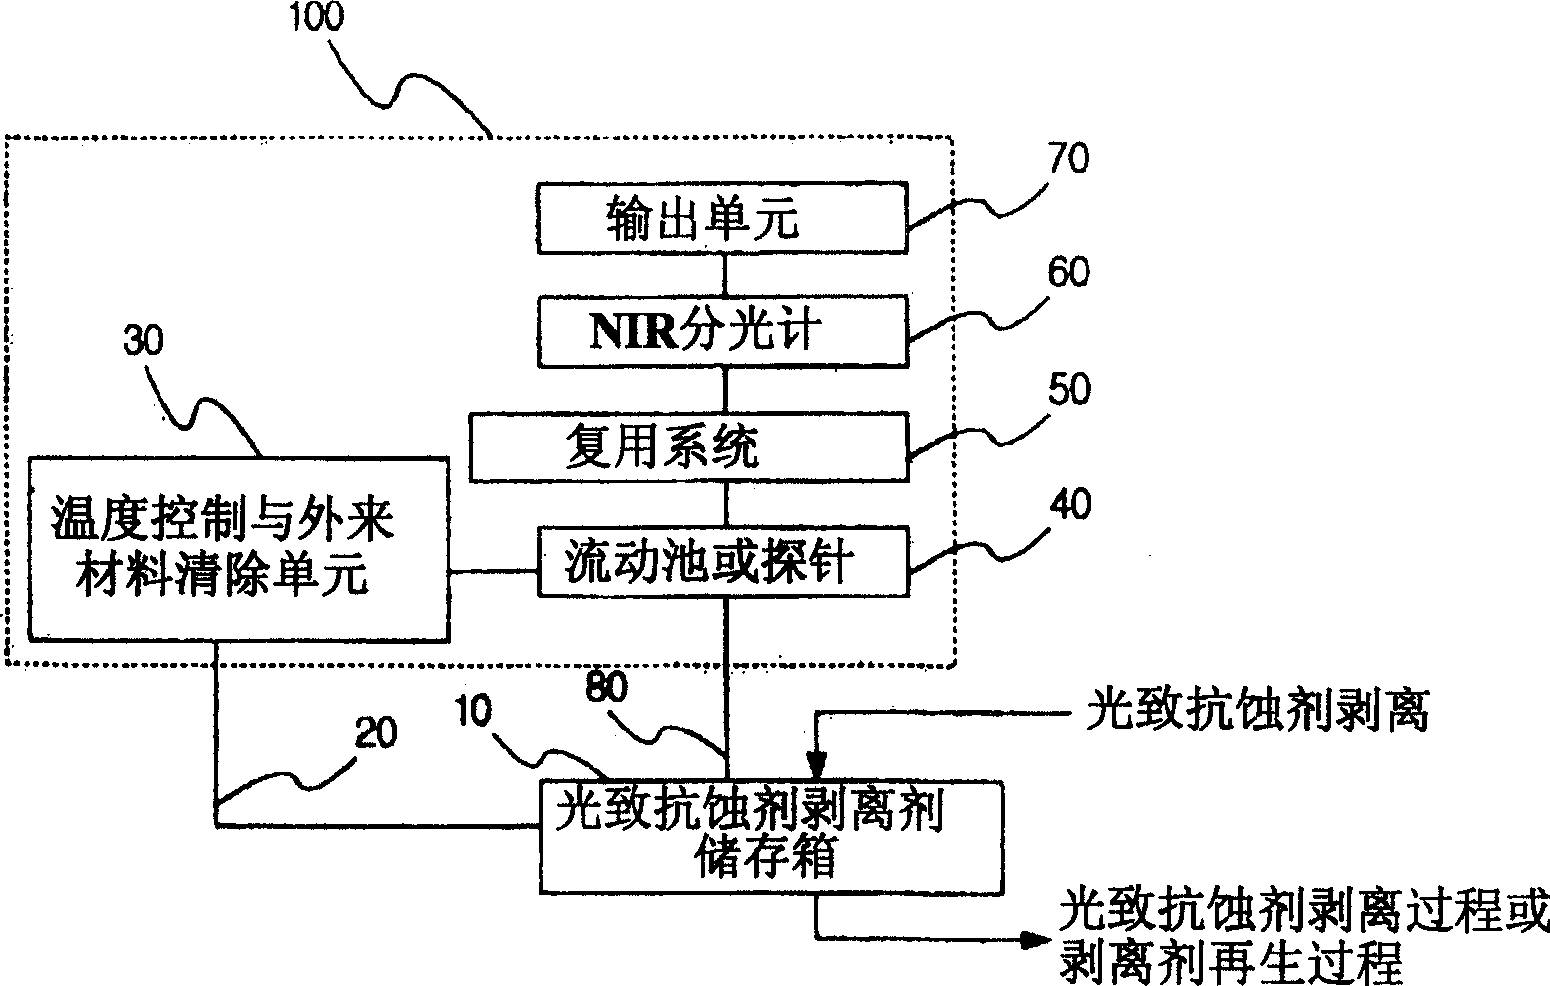 Method of controlling photoresist stripping process and regenerating photoresist stripper composition based on near infrared spectrometer